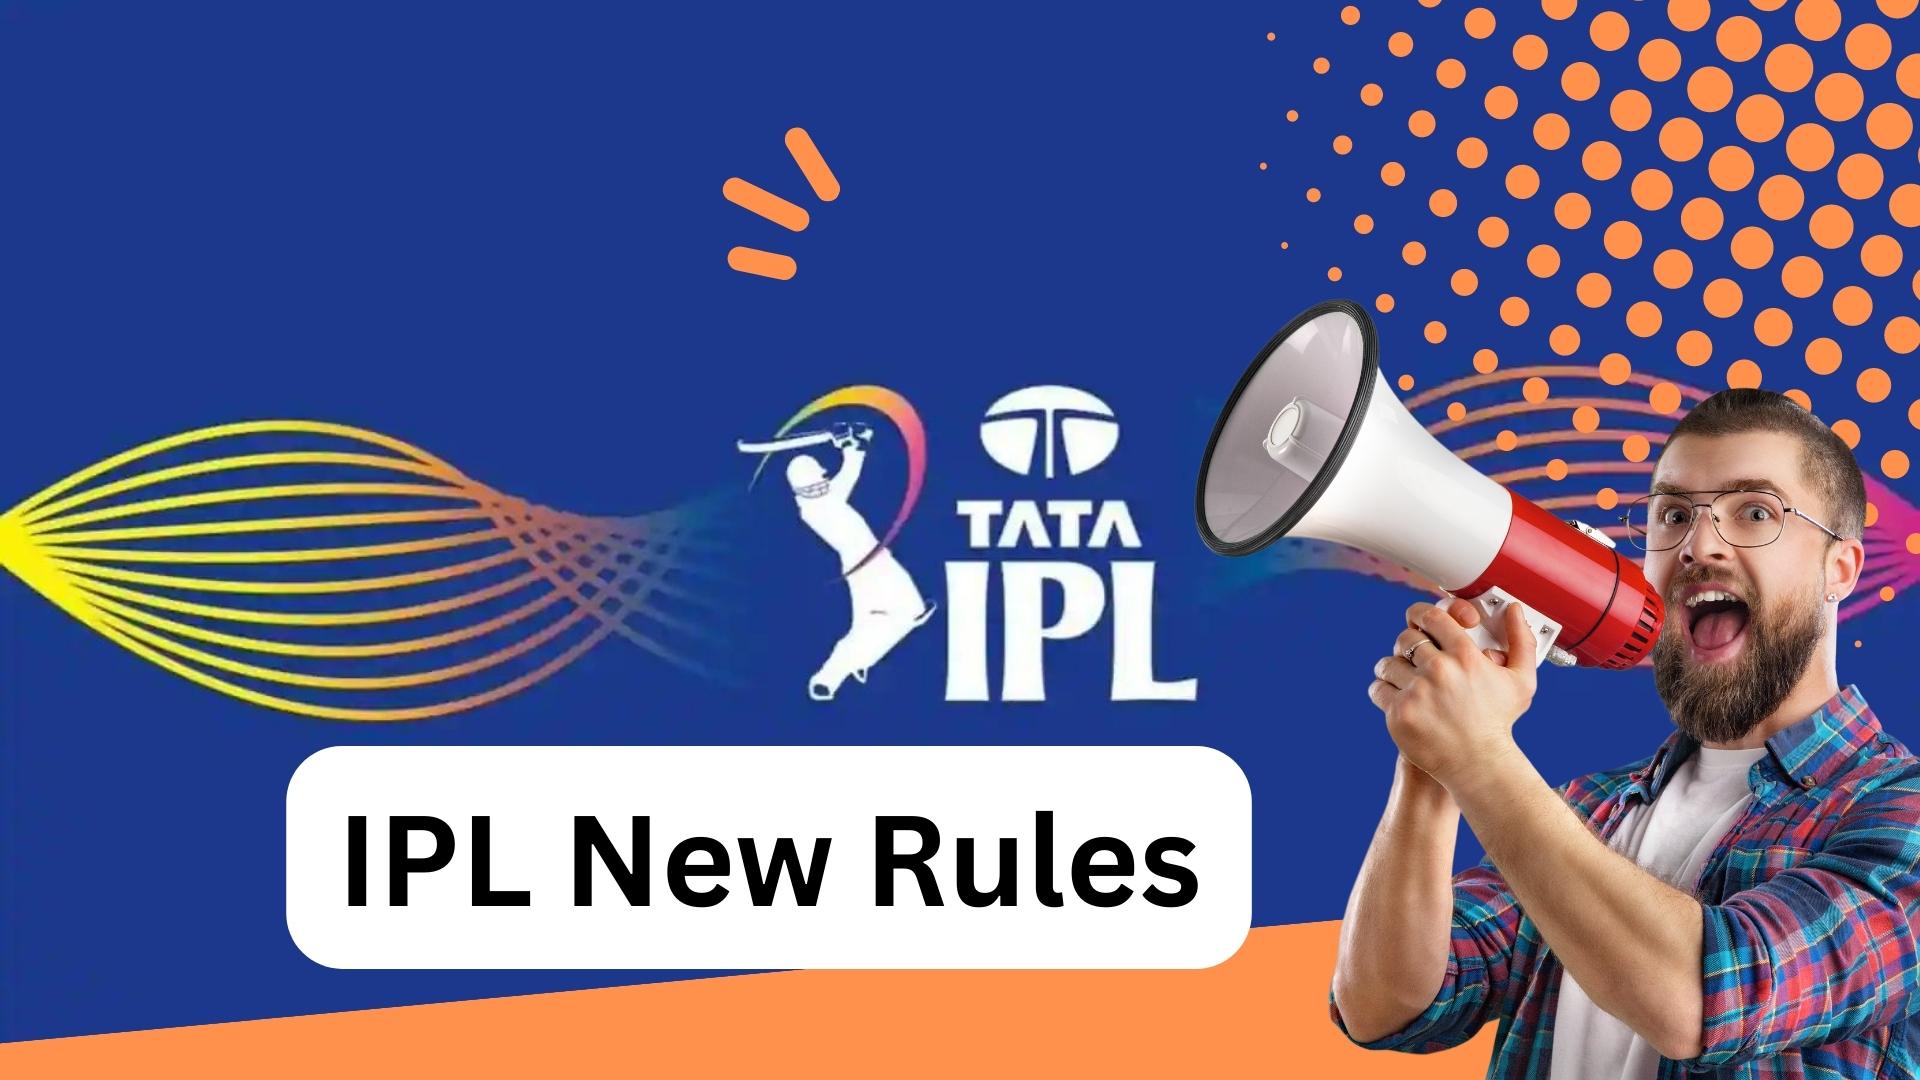 IPL 2023 Introduces Exciting New Rules to Enhance the Cricketing Experience